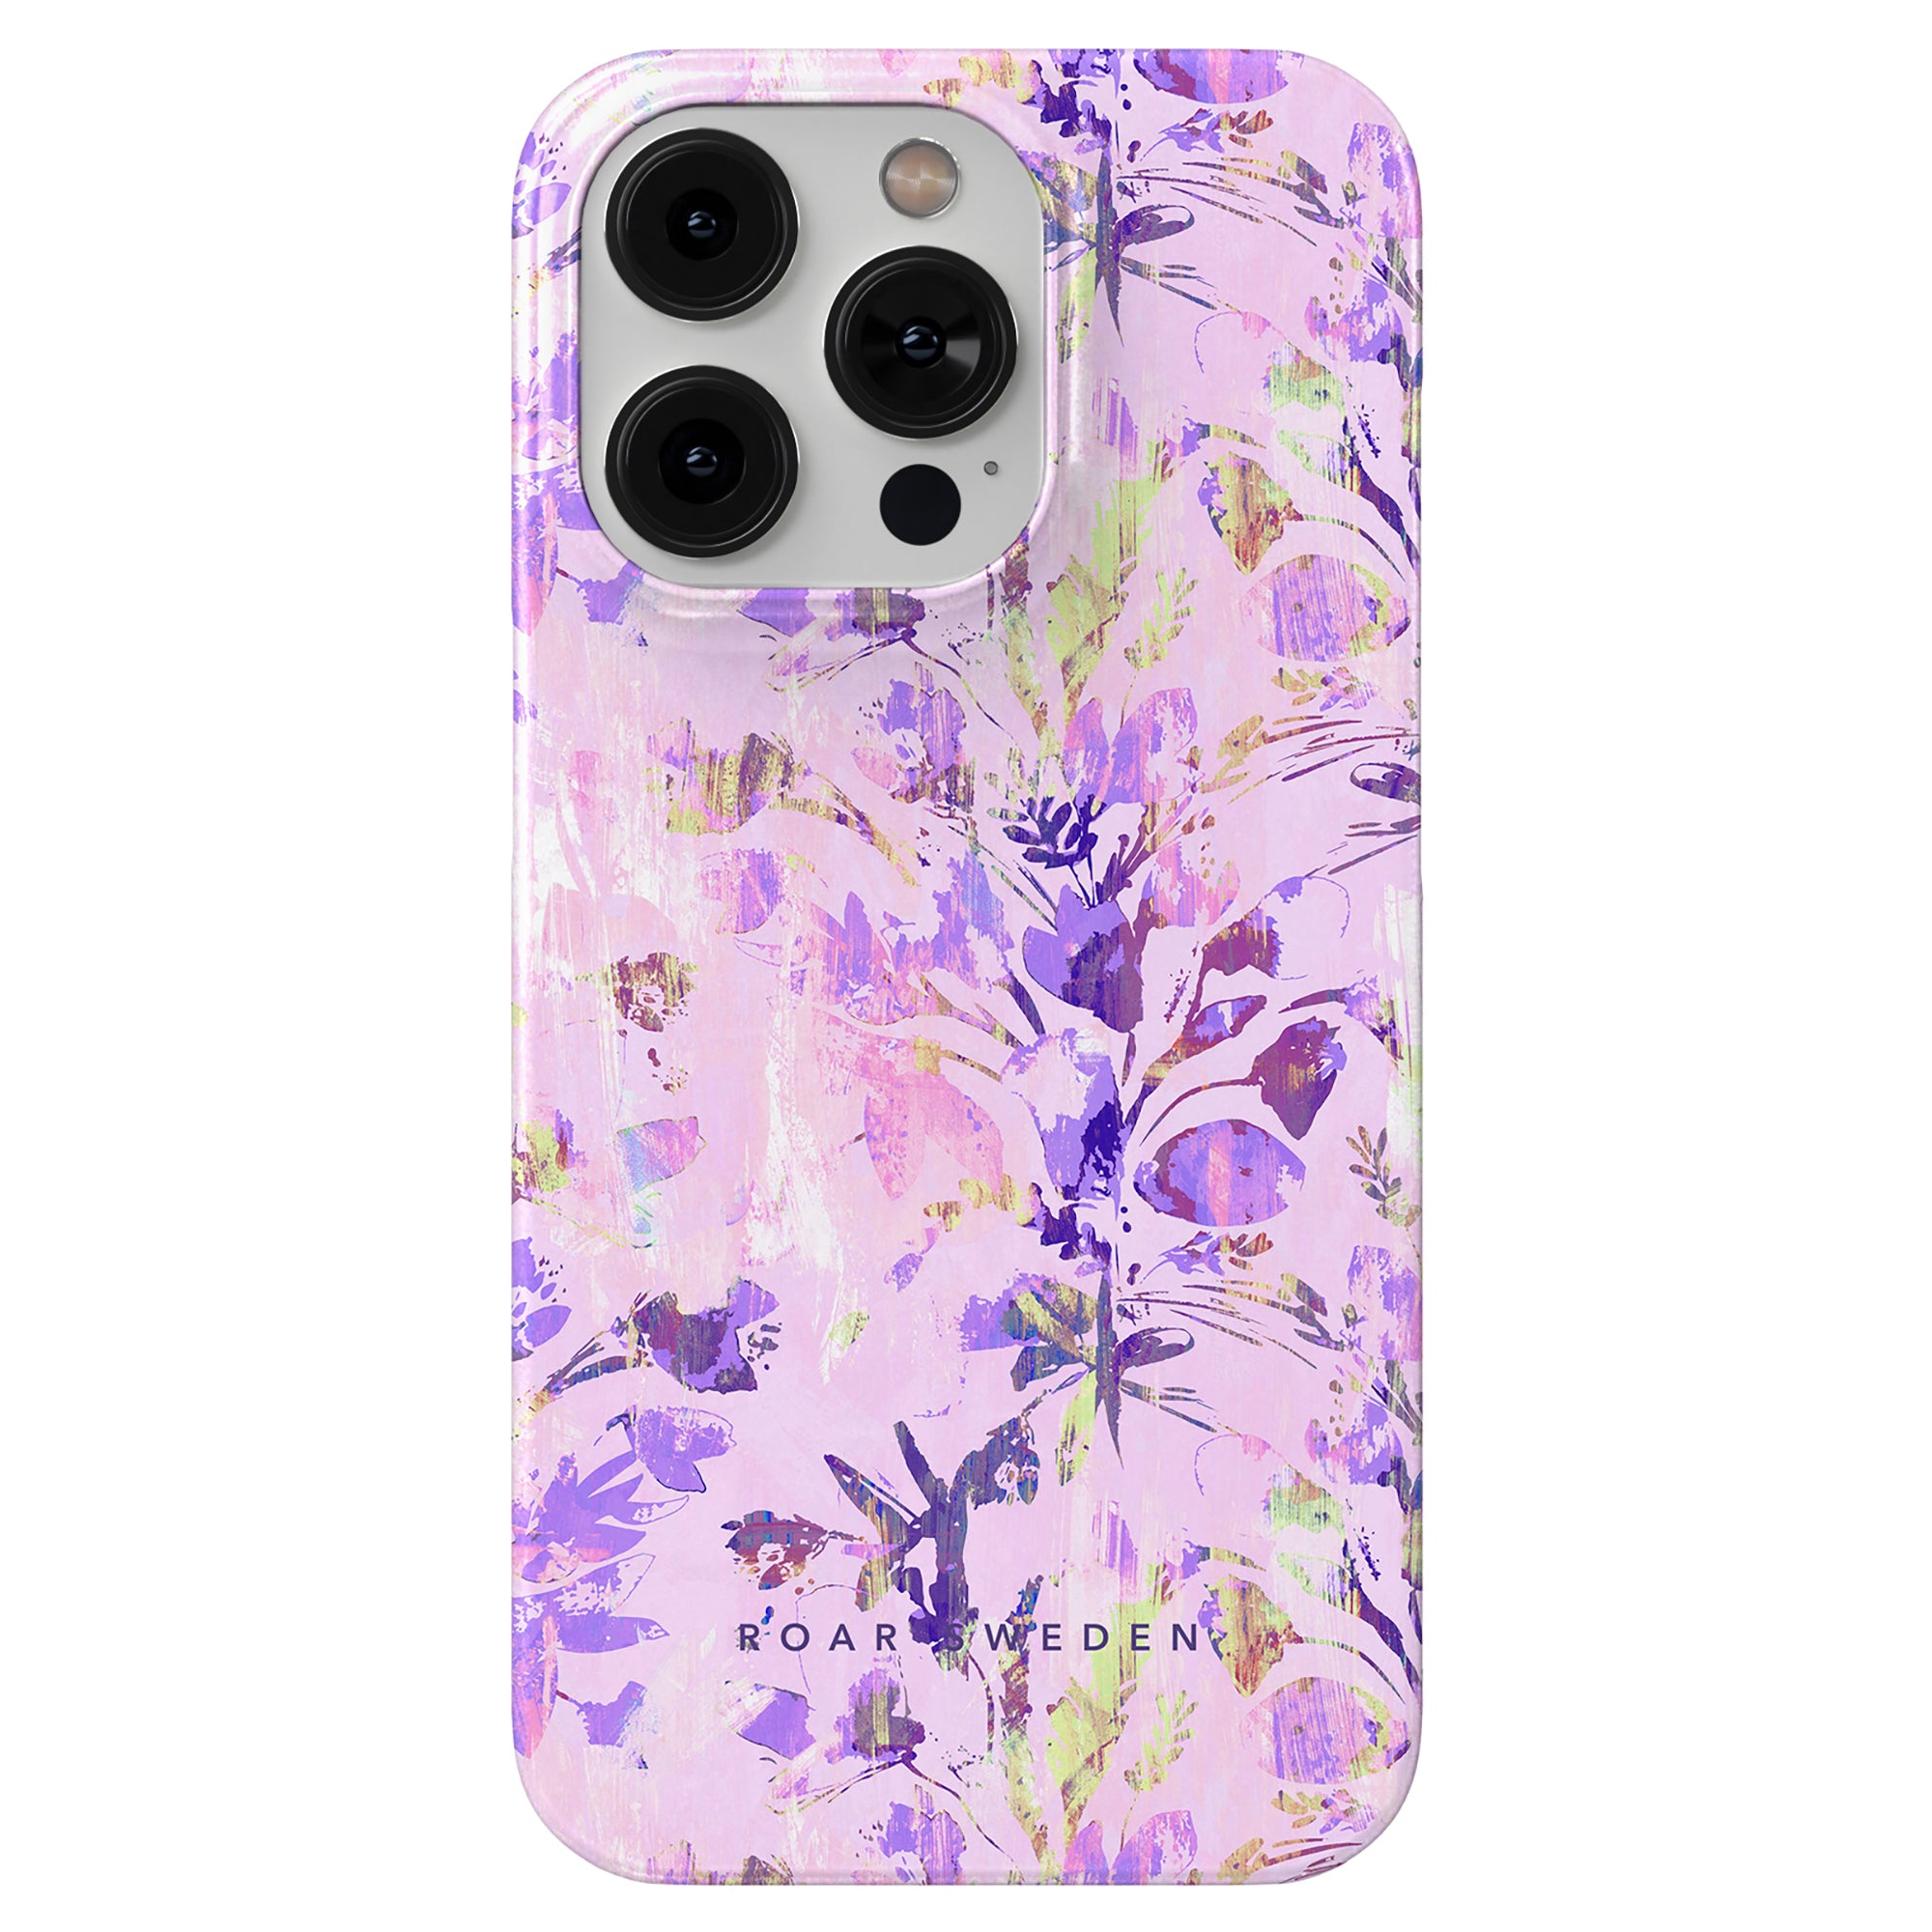 A Spring - Slim case with a purple and lavender floral and butterfly design, showcasing an organic face oil-reminiscent hydrating formula texture, featuring printed text at the bottom.